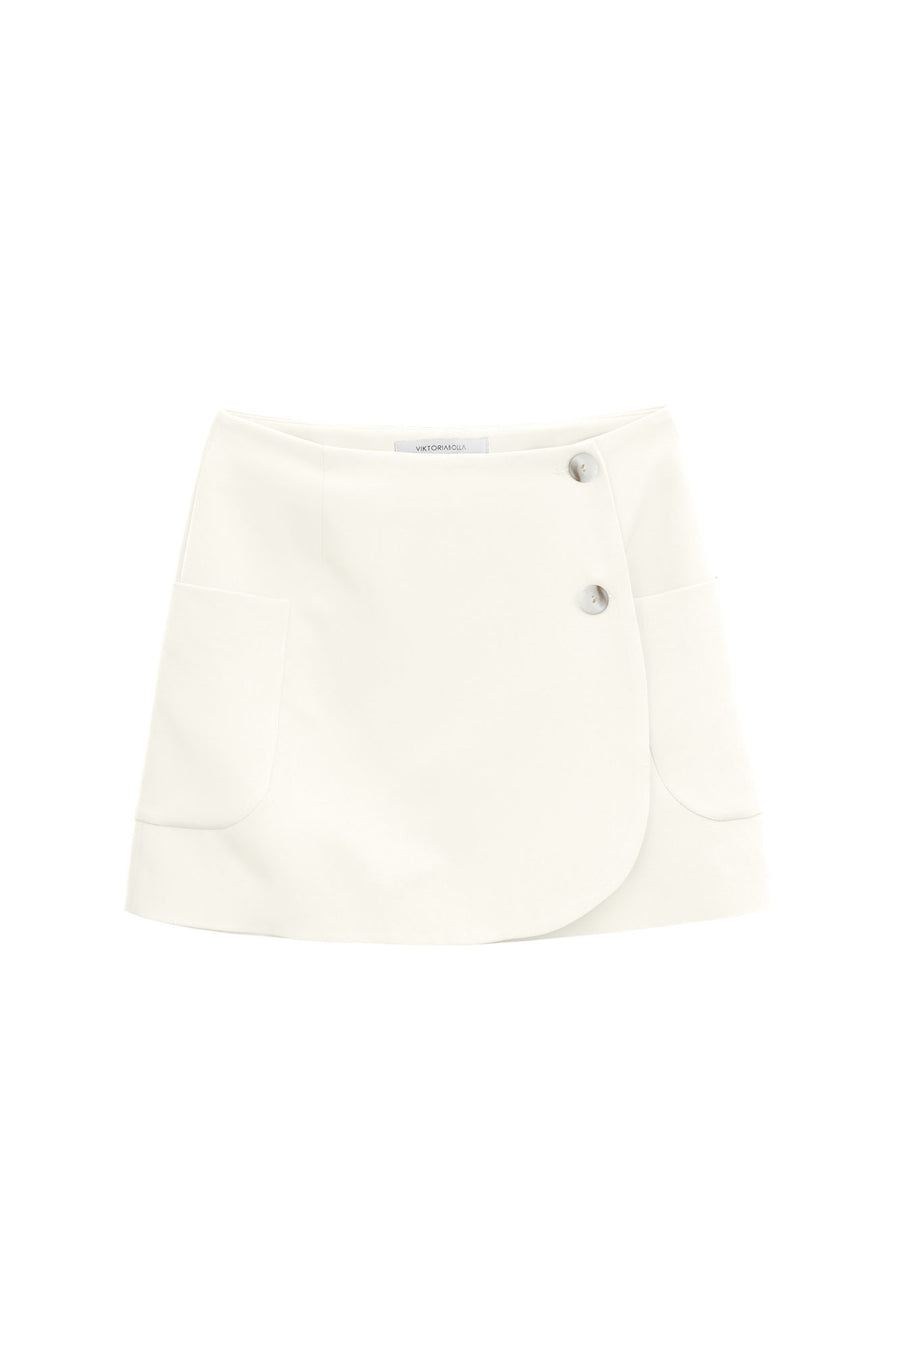 THE OVER LAP BUTTONED SKIRT WHITE